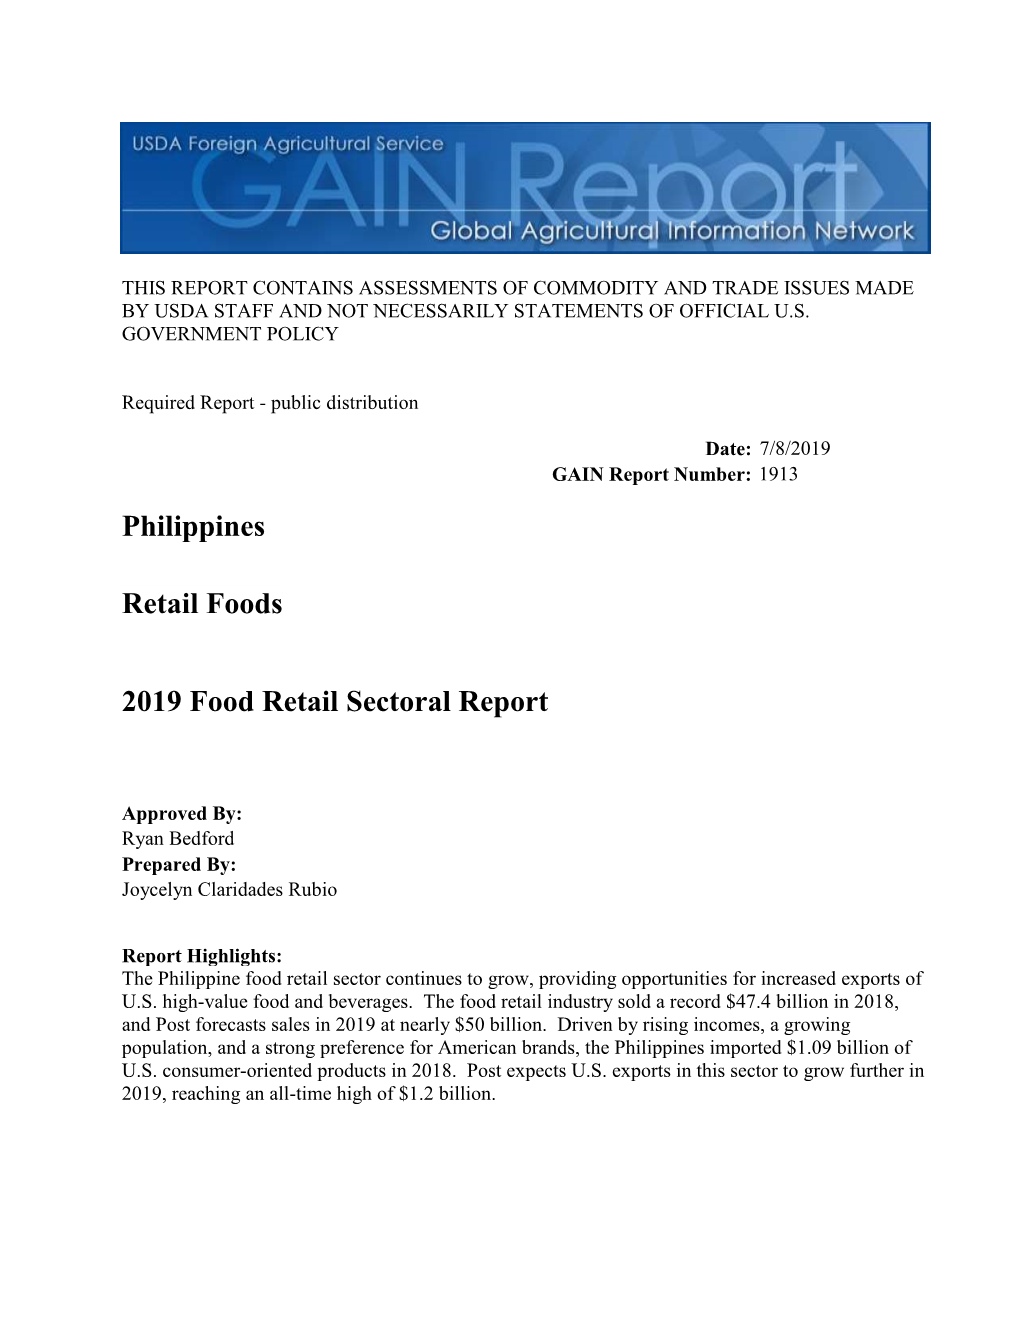 2019 Philippines Food Retail Sectoral Report